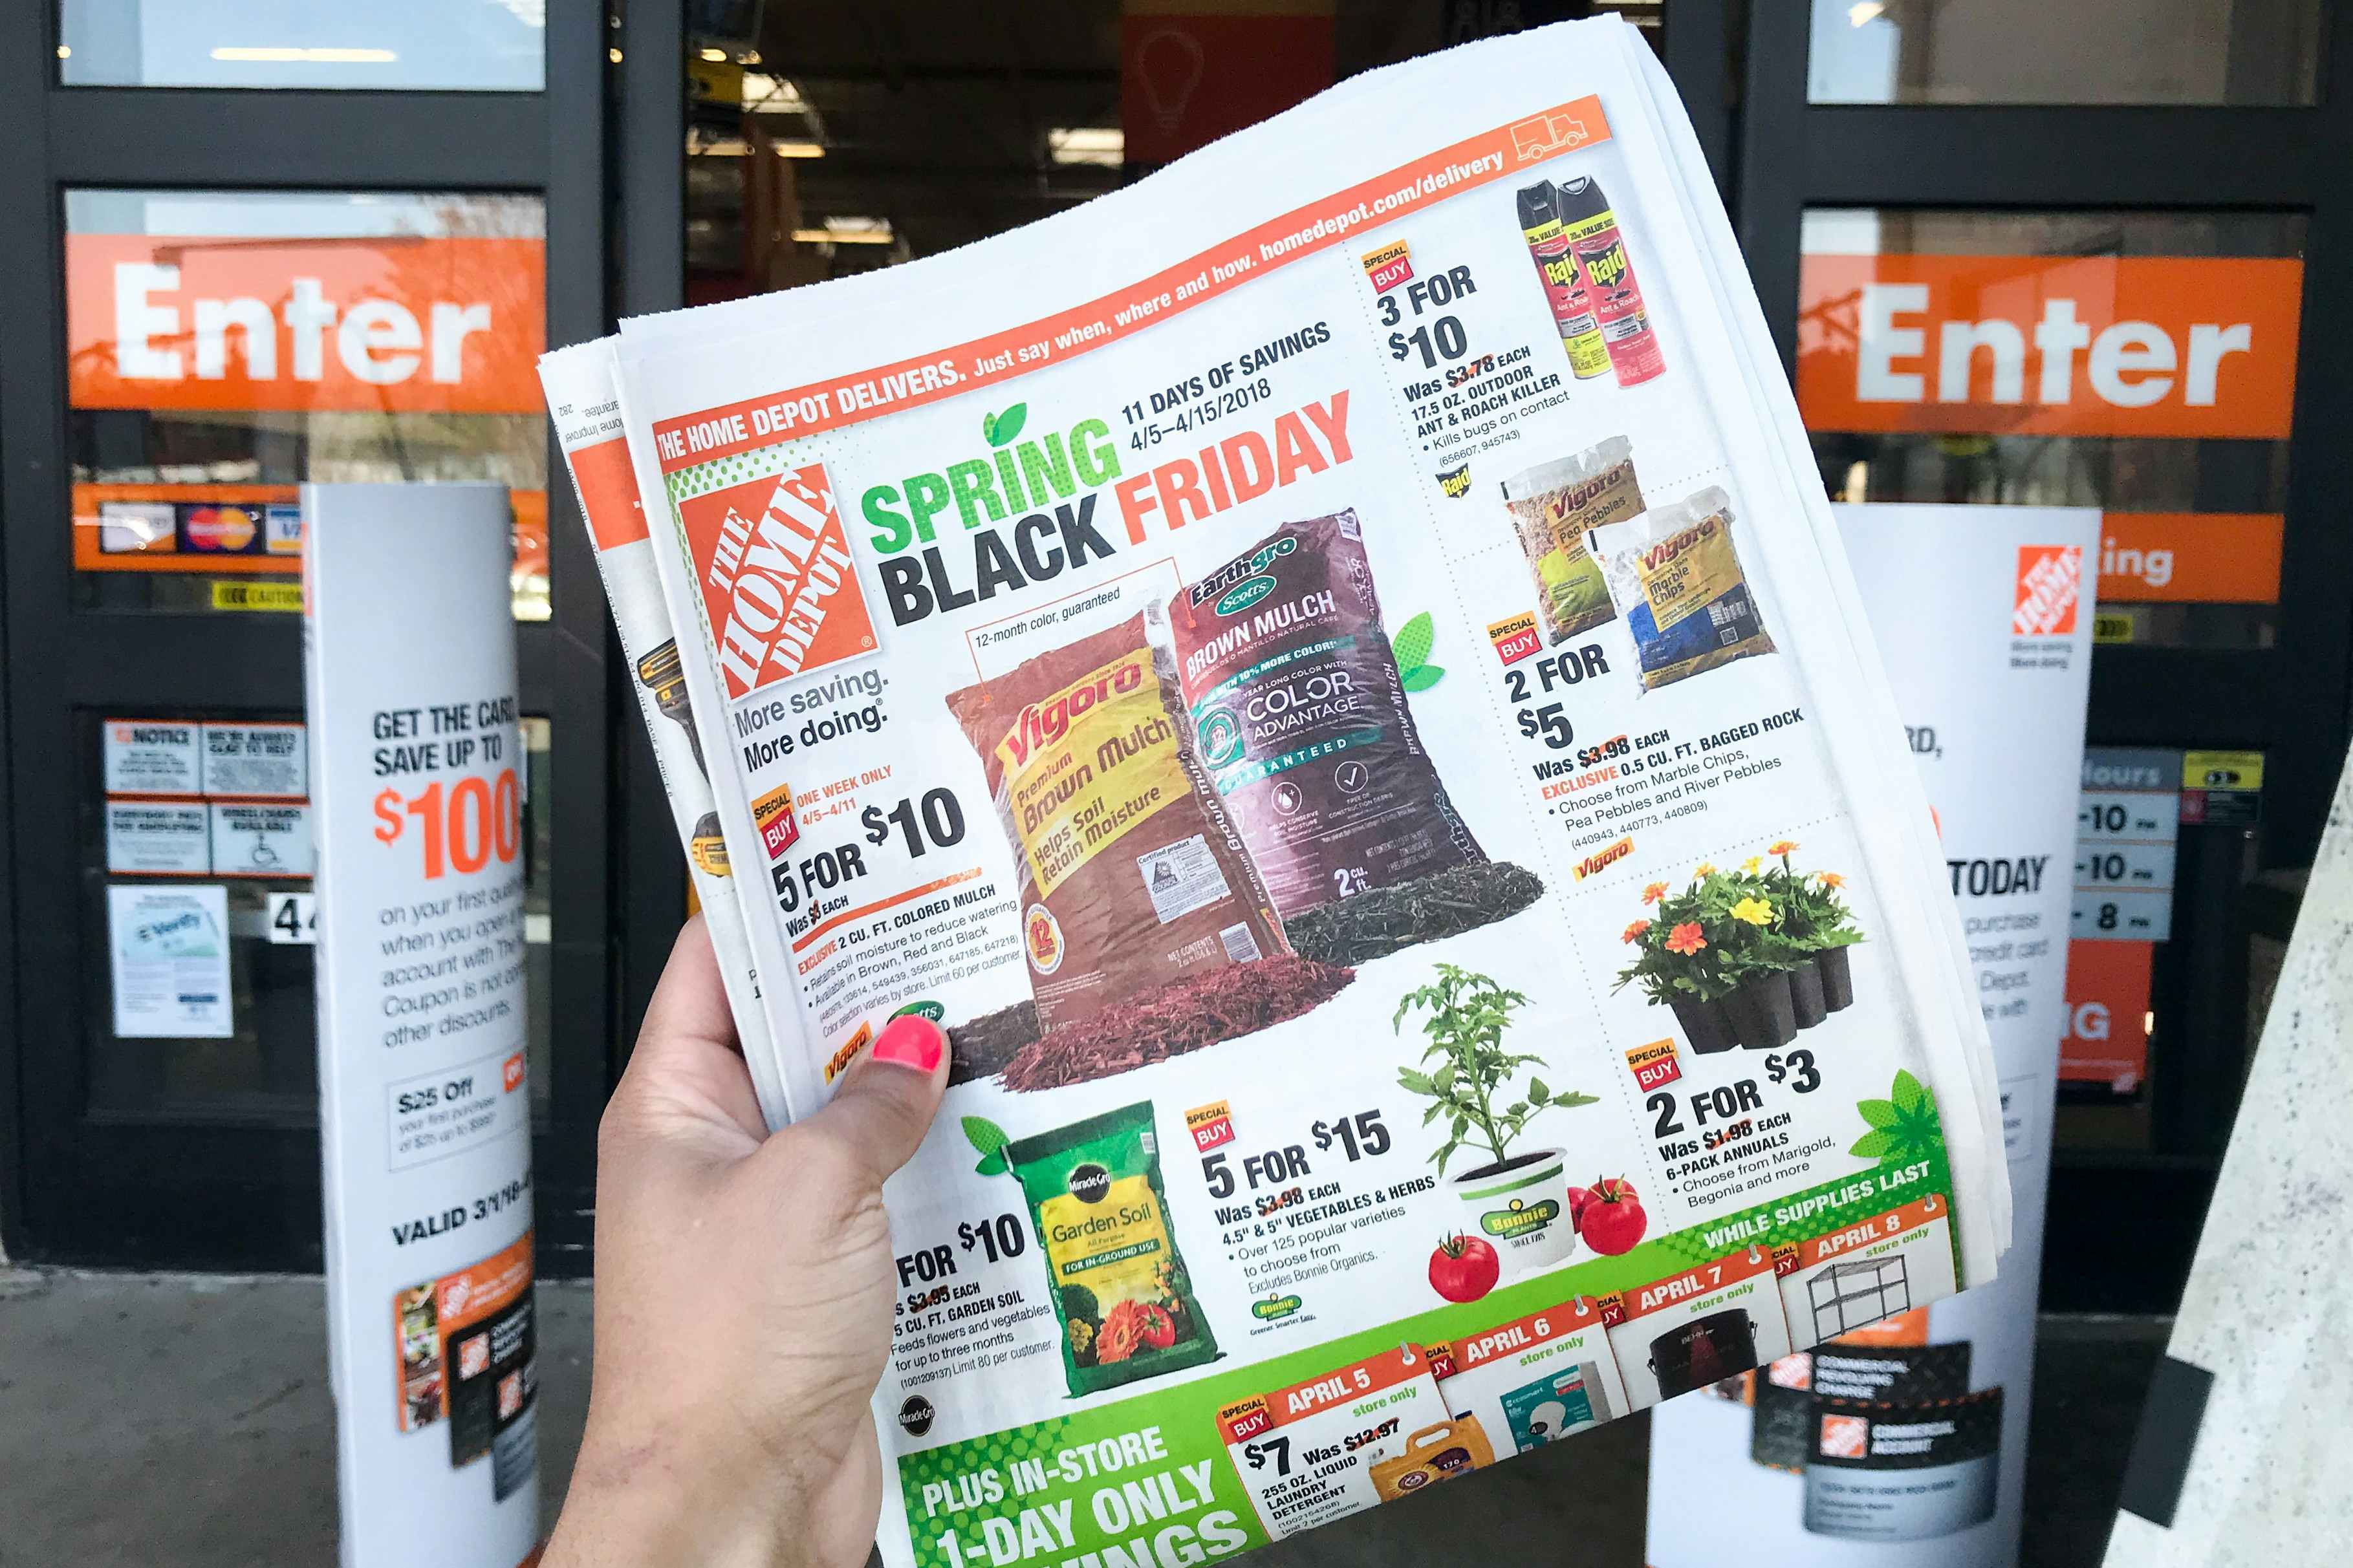 A Spring Black Friday advertisement held in front of the store entrance.